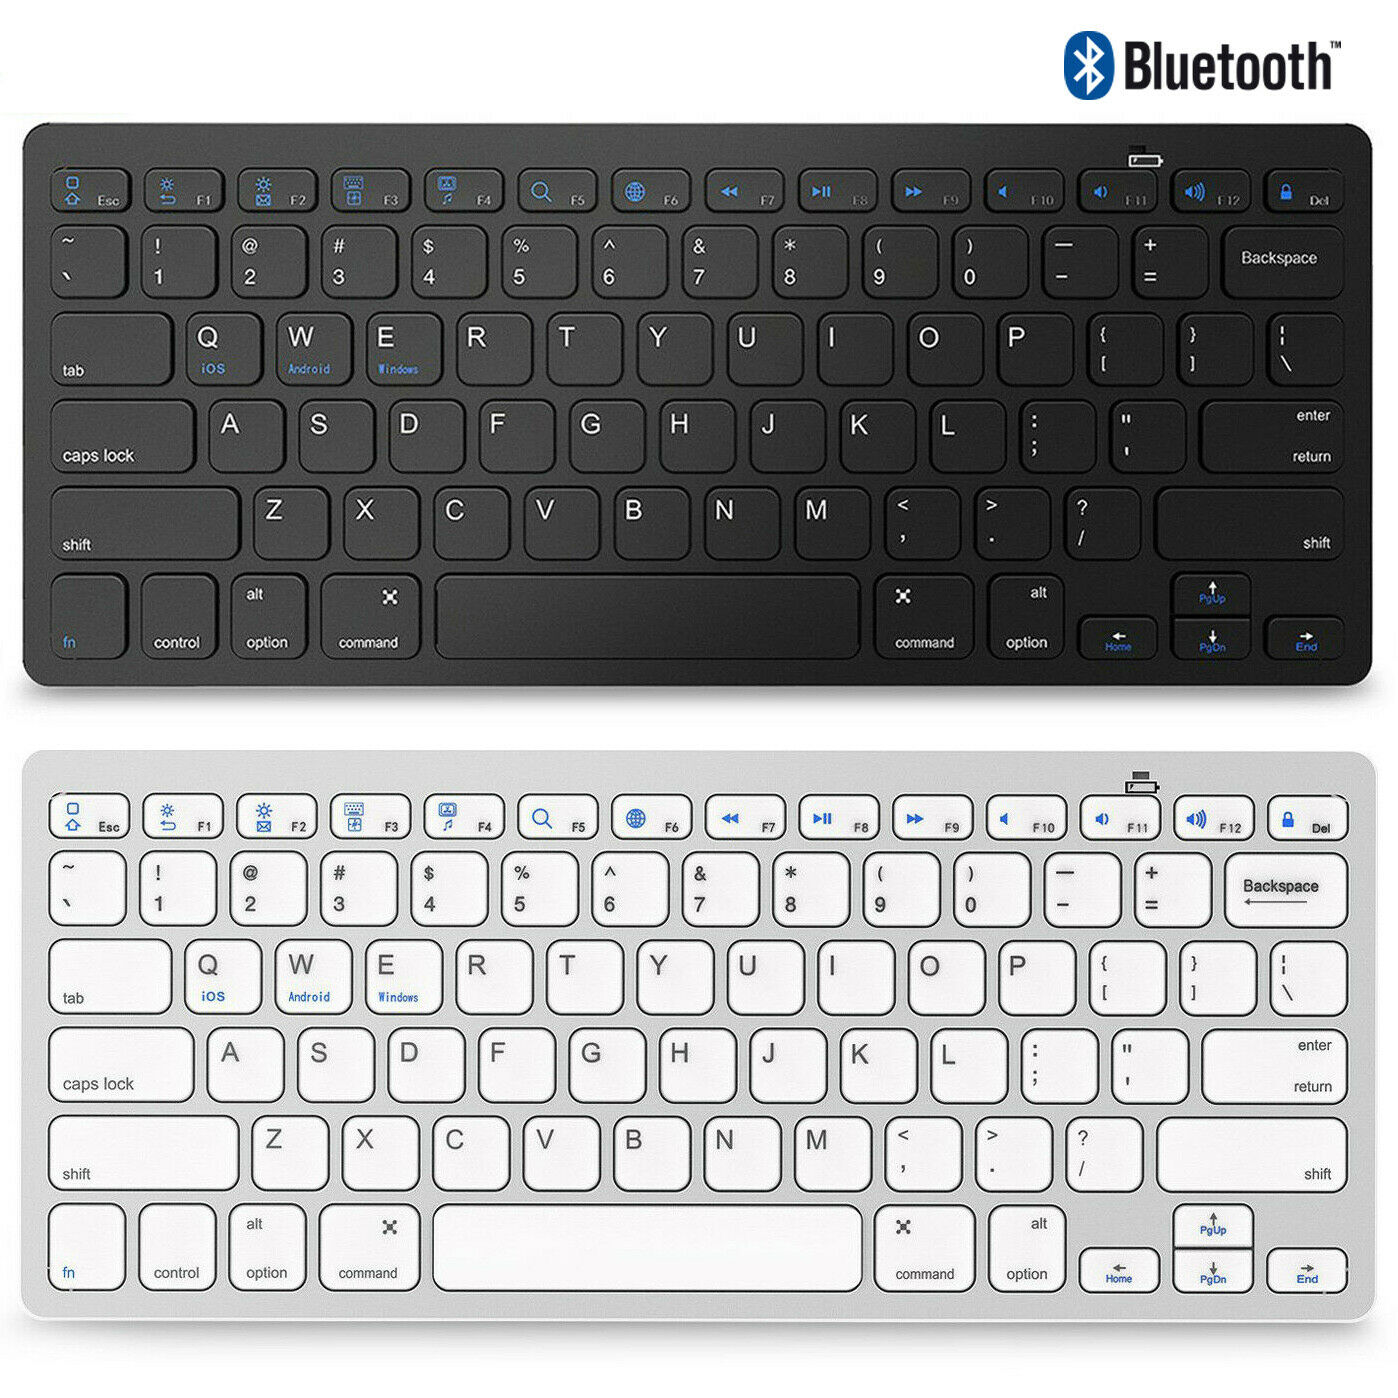 Wireless Bluetooth Keyboard For Ios Android Windows Mac Os Pc Tablet Smartphone